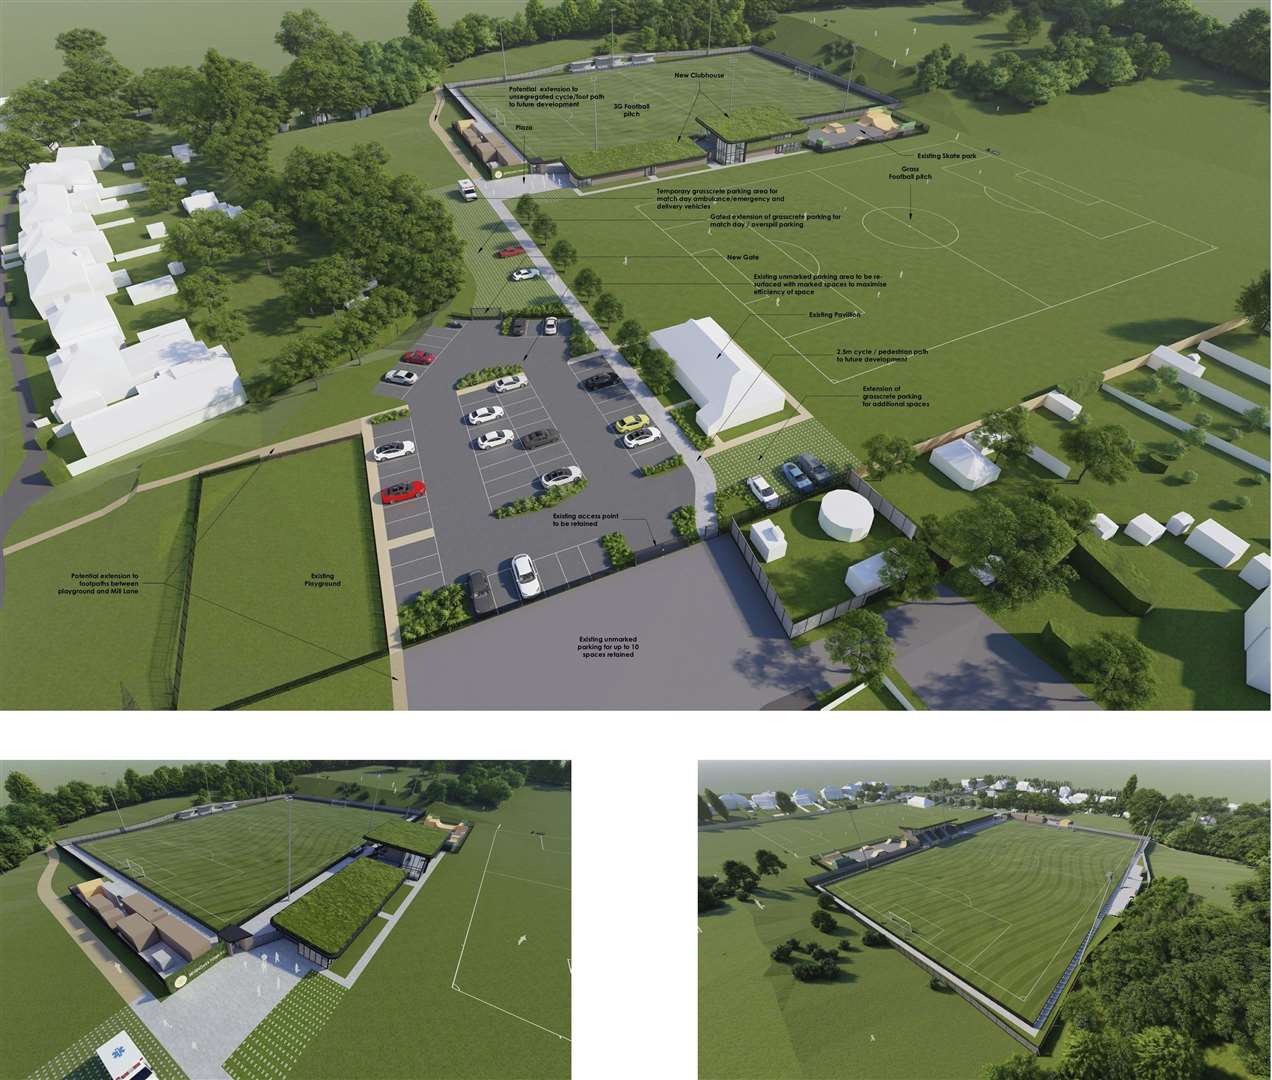 Computer-generated images of Sevenoaks Town ground improvements